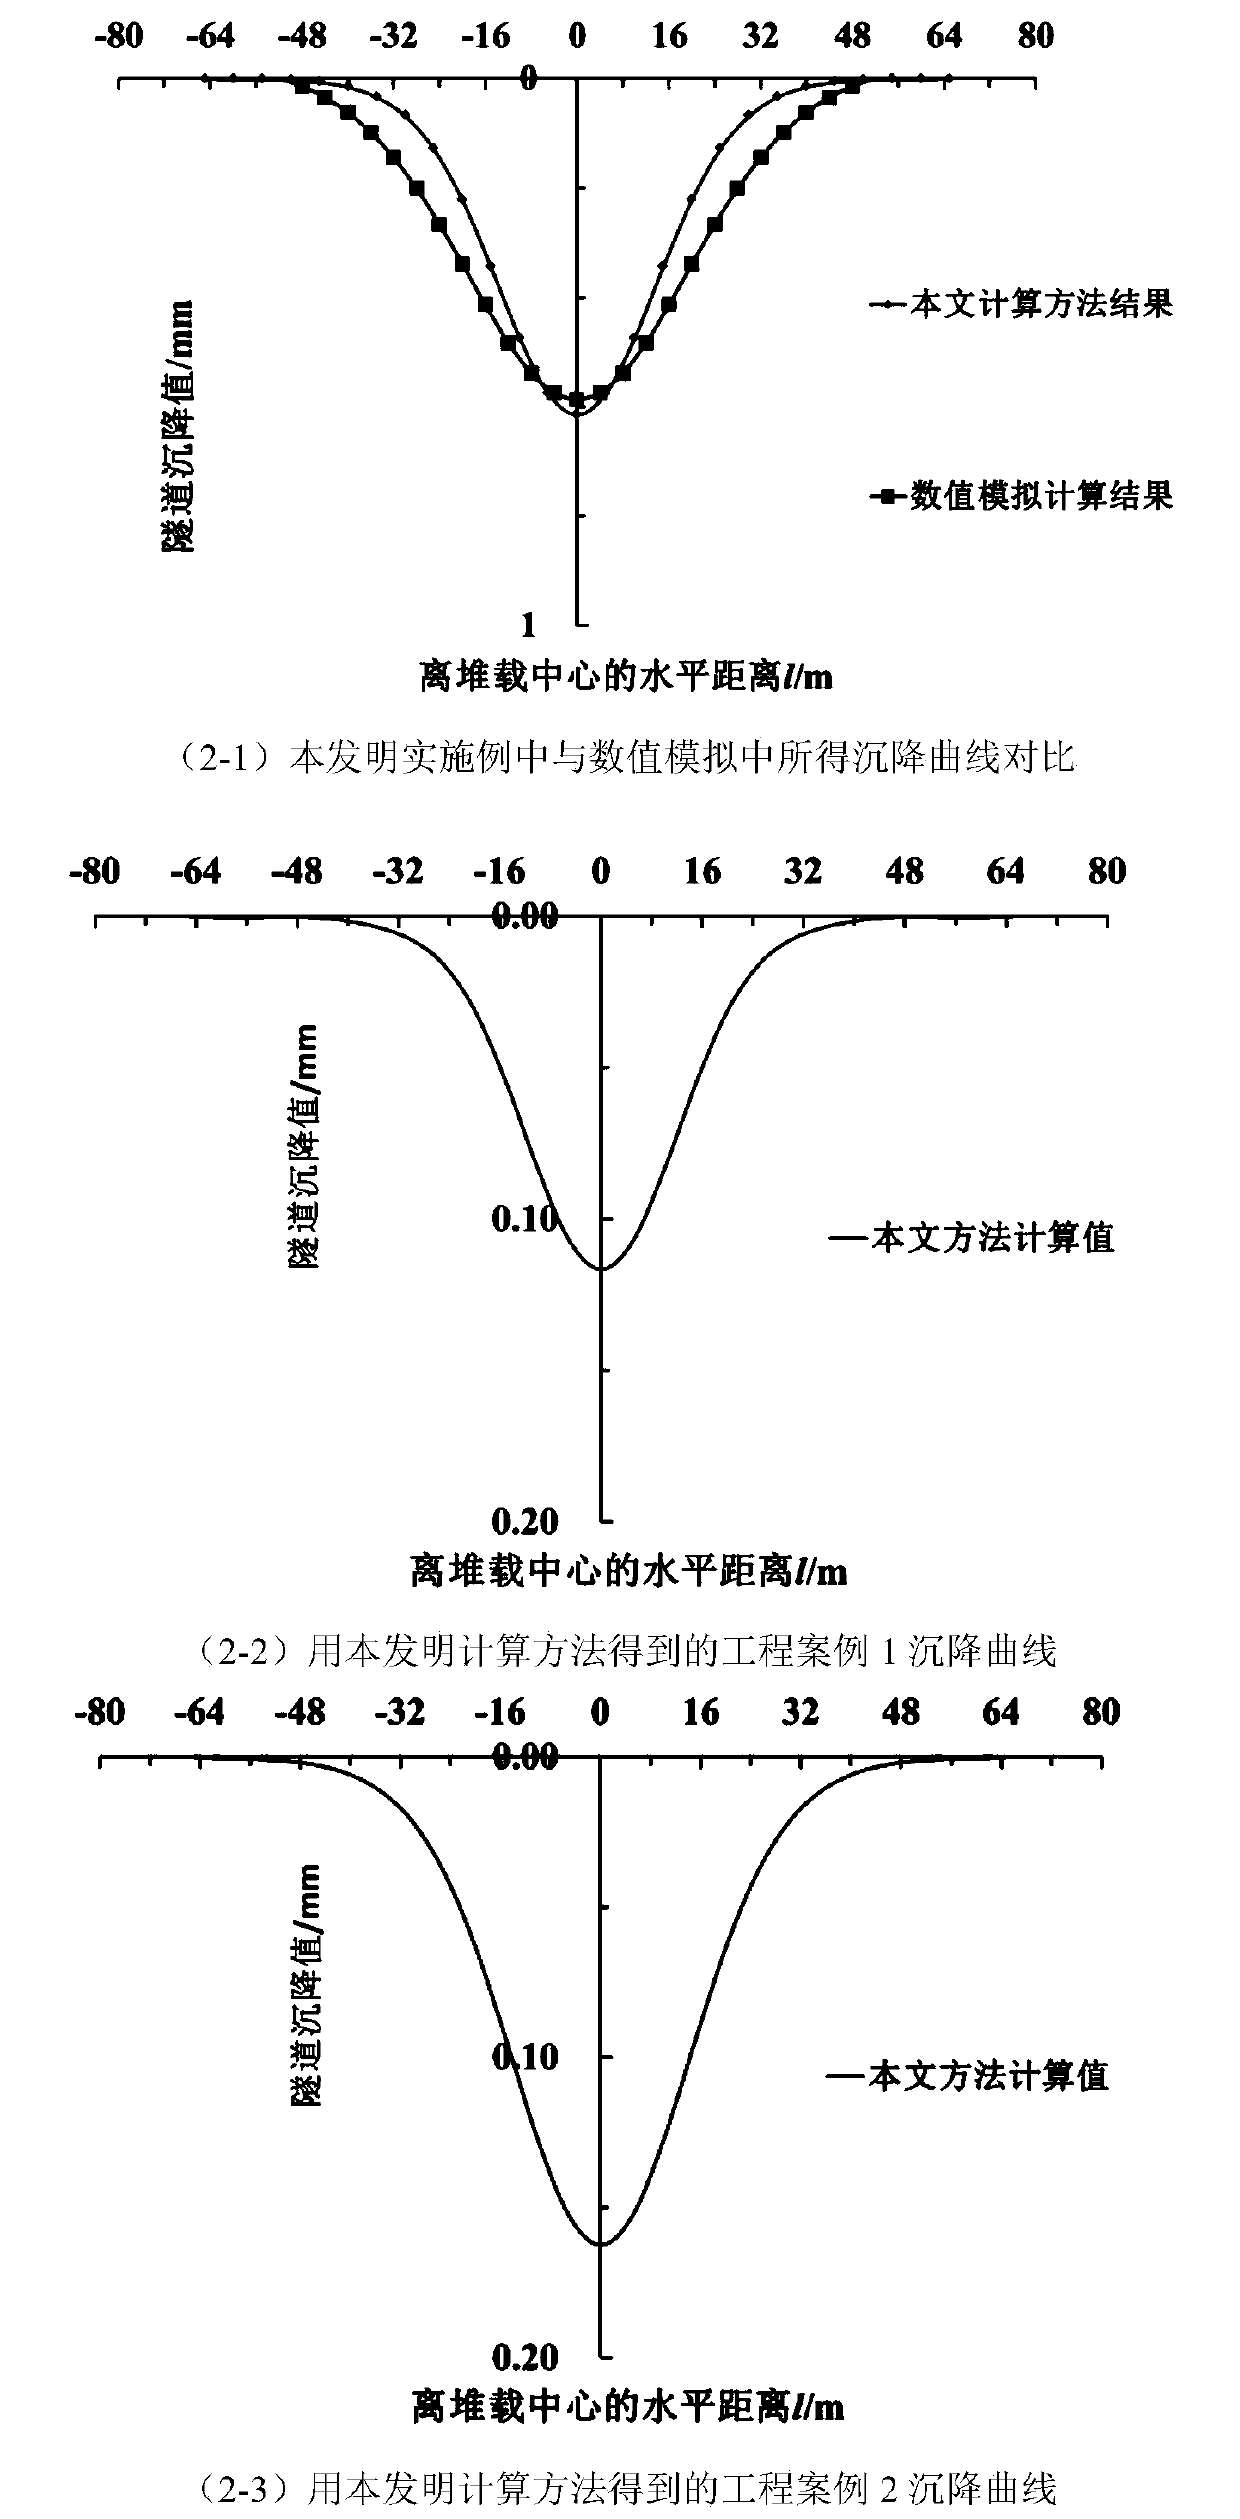 Calculation method for displacement deformation of existing tunnel caused by concentrated loads in tunnel